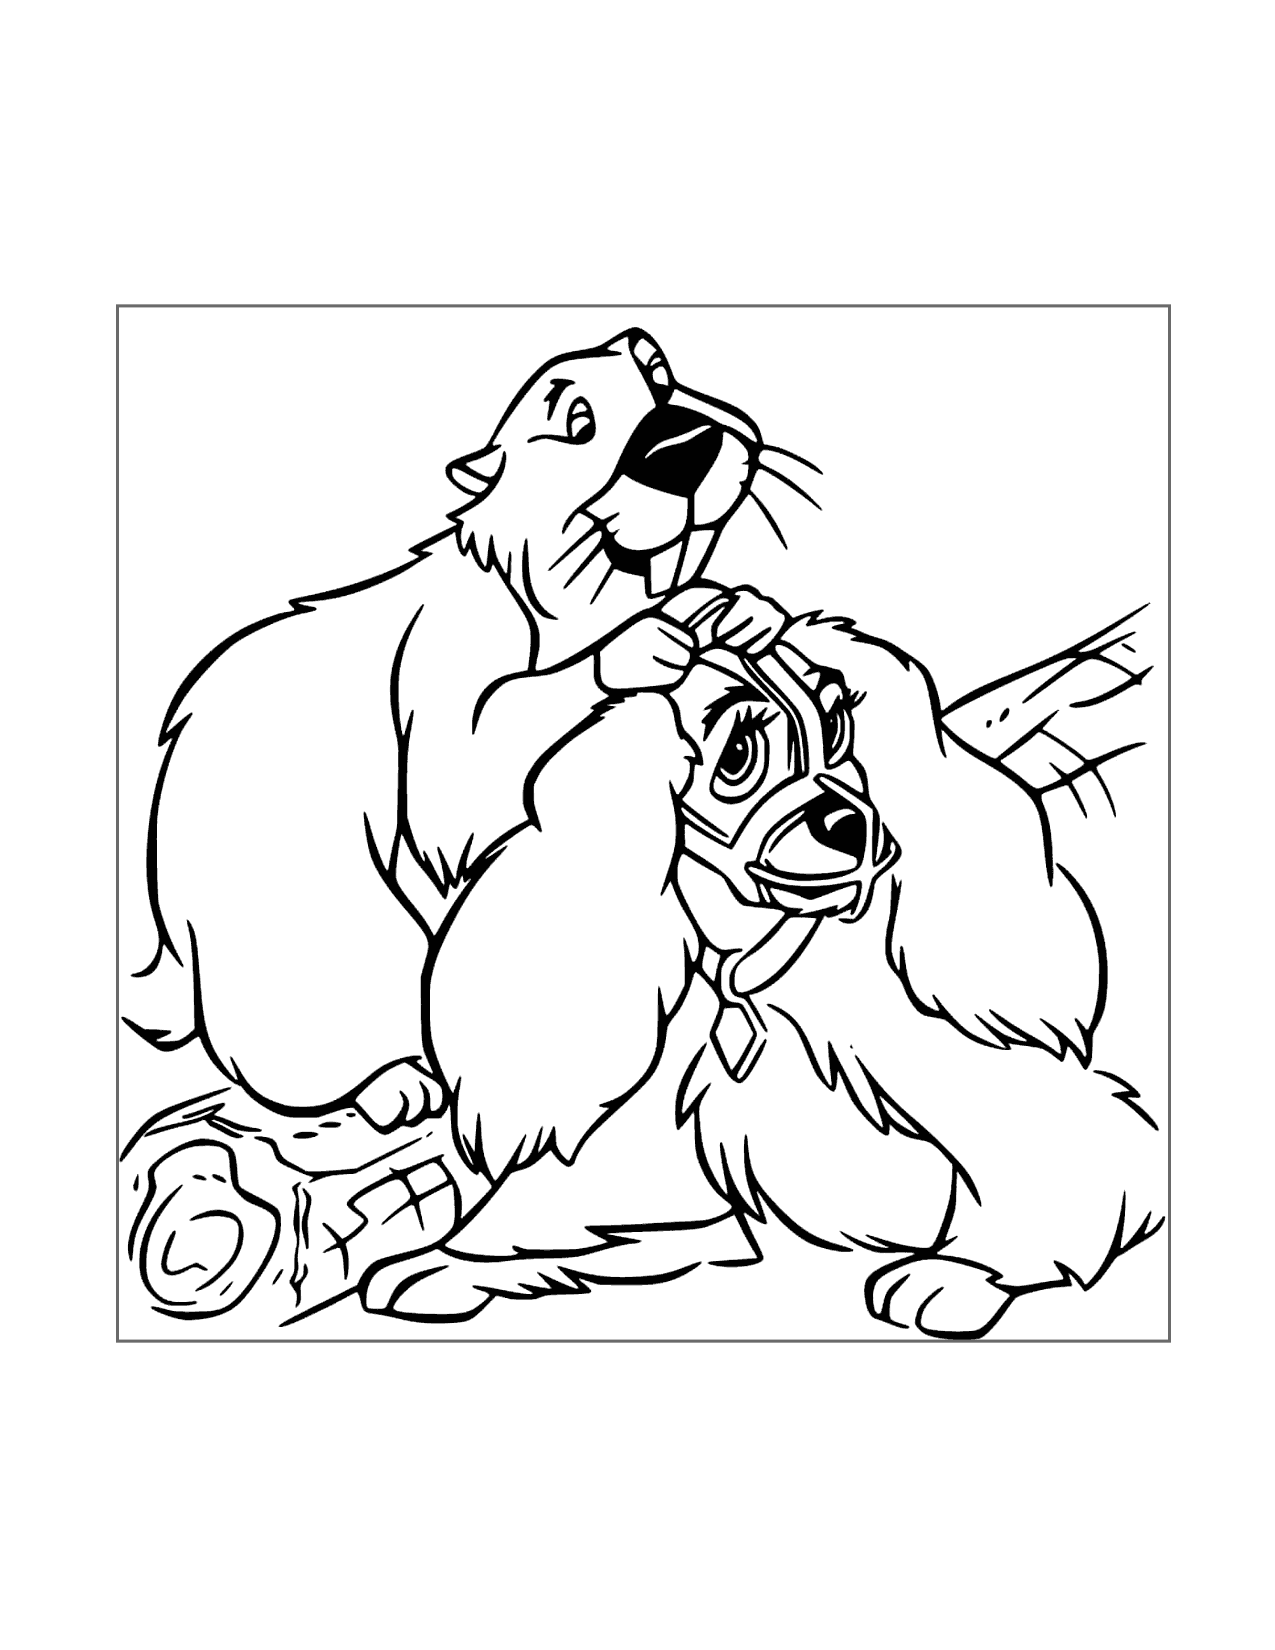 Beaver Removes Ladys Muzzel Coloring Page